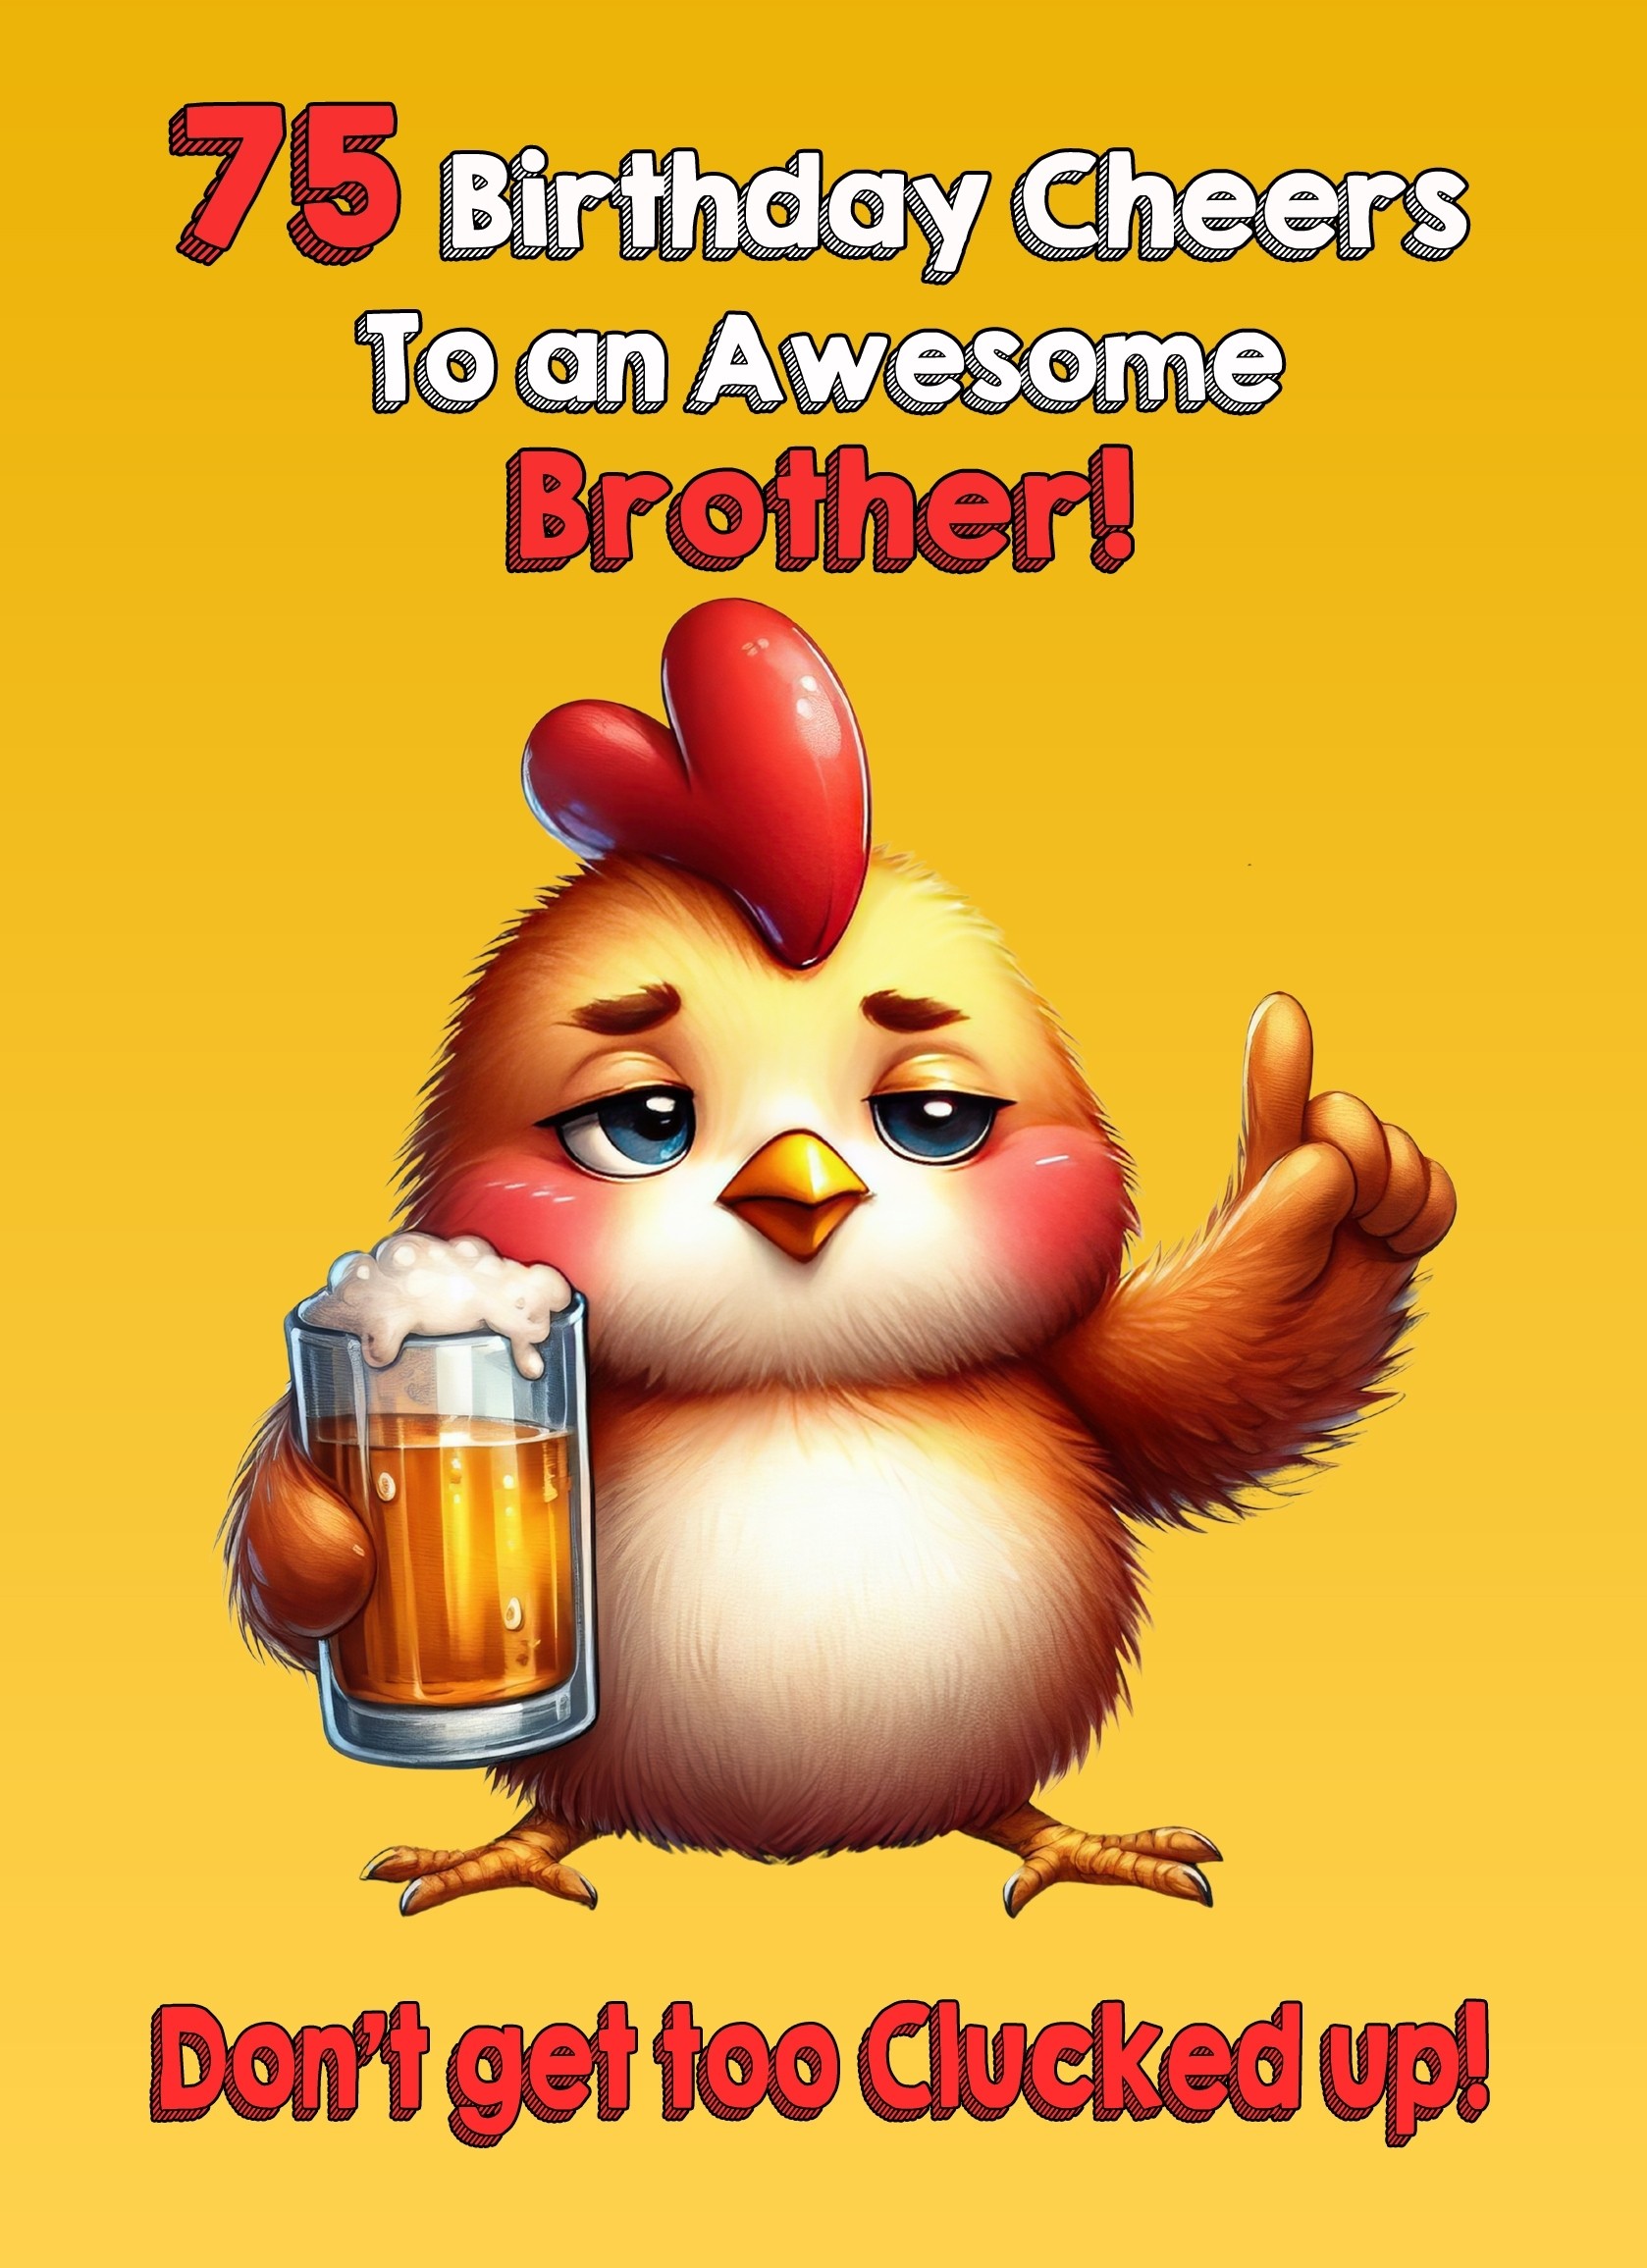 Brother 75th Birthday Card (Funny Beer Chicken Humour)